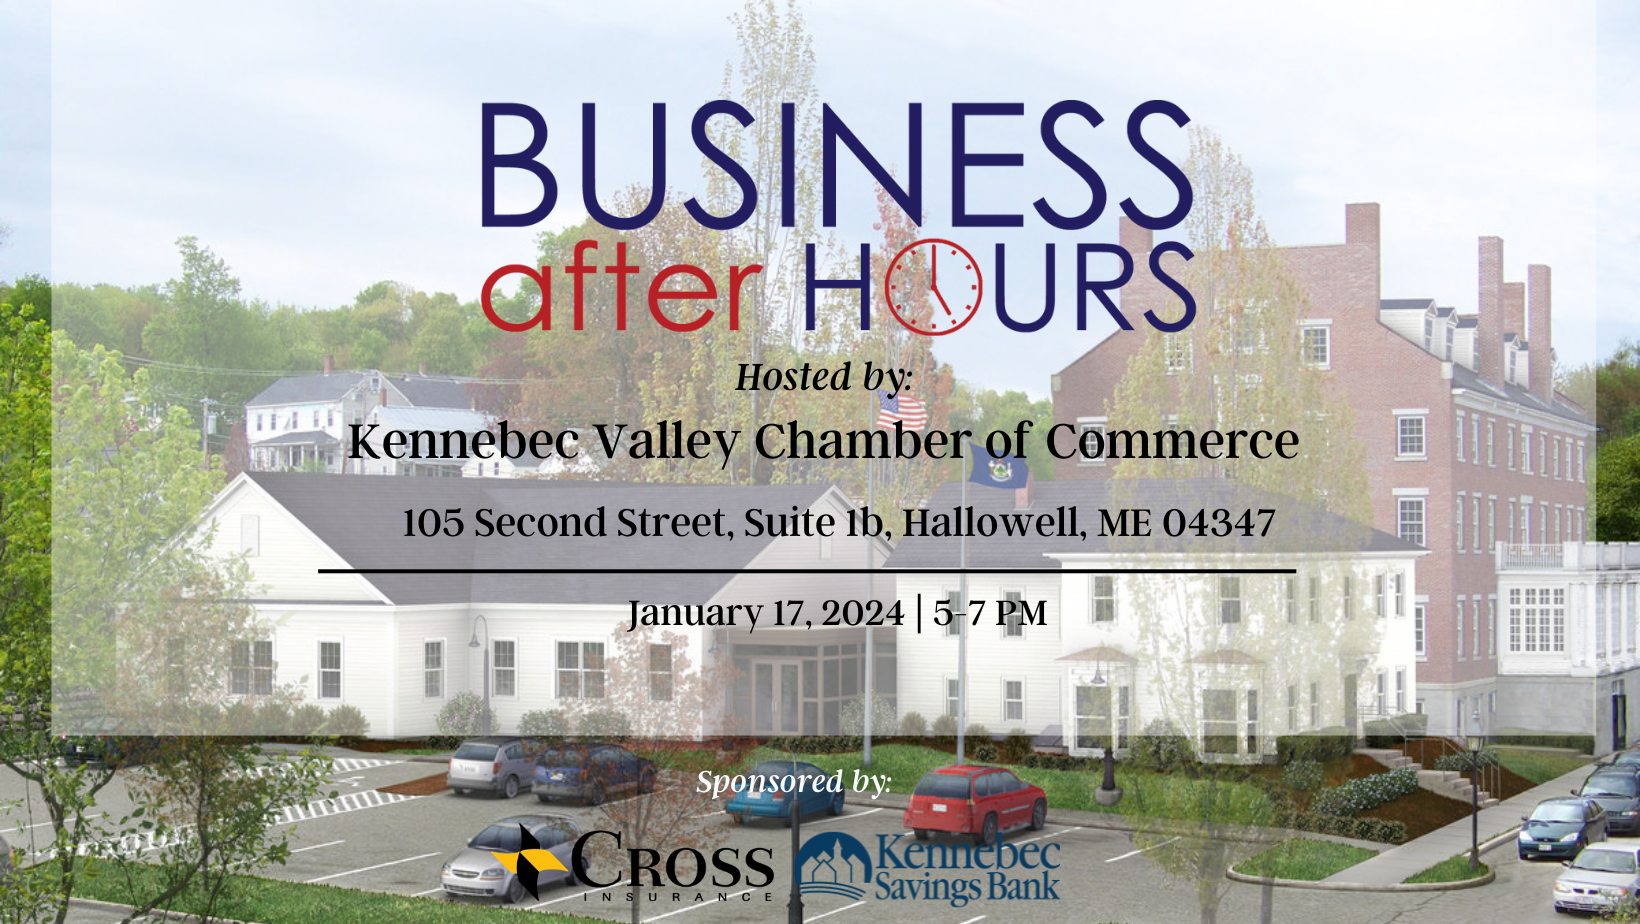 Business After Hours - Hosted by: Kennebec Valley Chamber of Commerce, 105 Second Street, Suite 1b, Hallowell, ME 04347 - January 17, 2024 | 5-7 PM - Sponsored by Cross Insurance, Kennebec Savings Bank and Valley Beverage